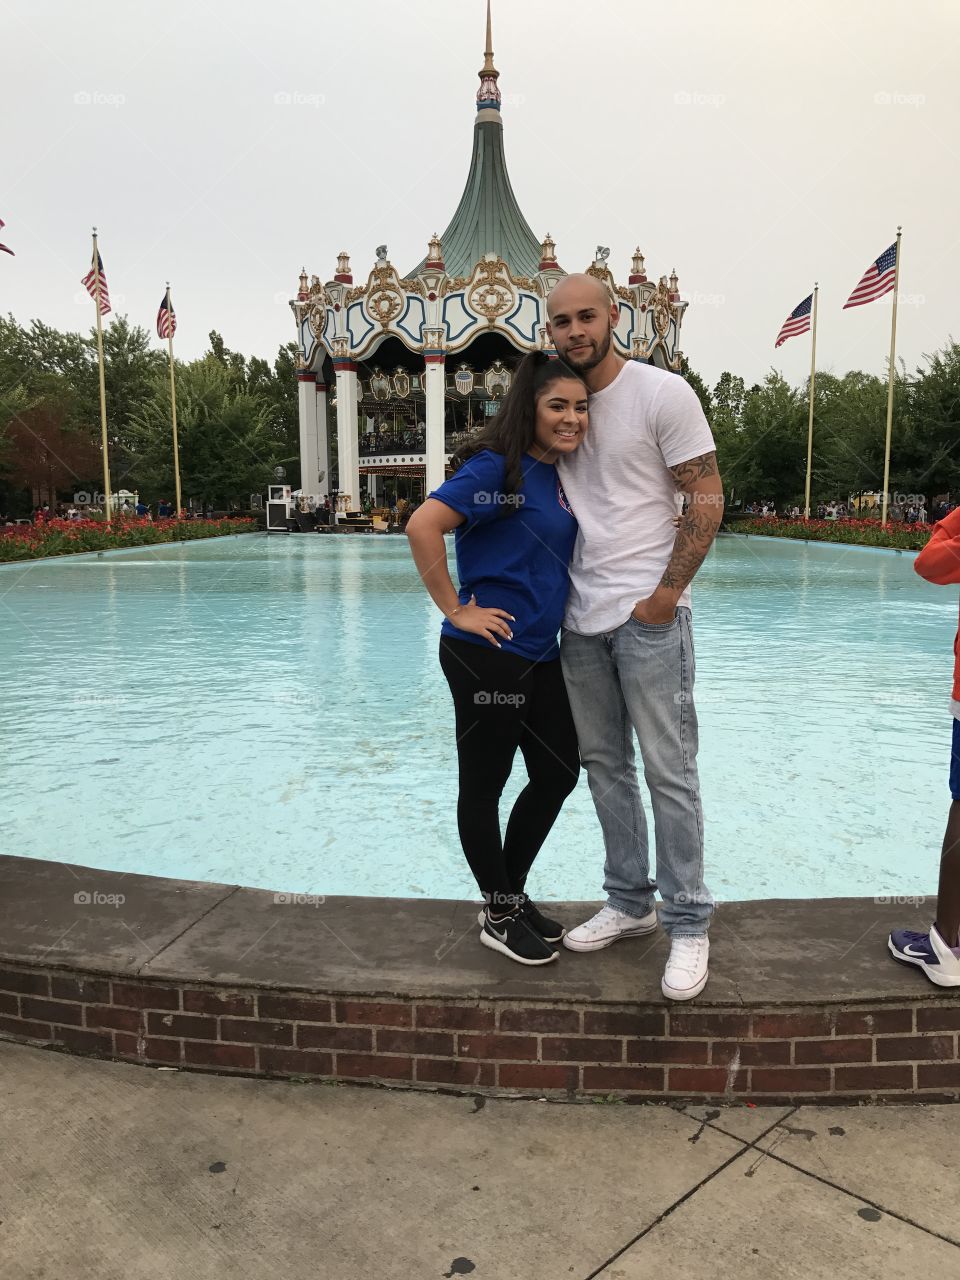 Family fun is the best kind of fun! Six flags great America! 